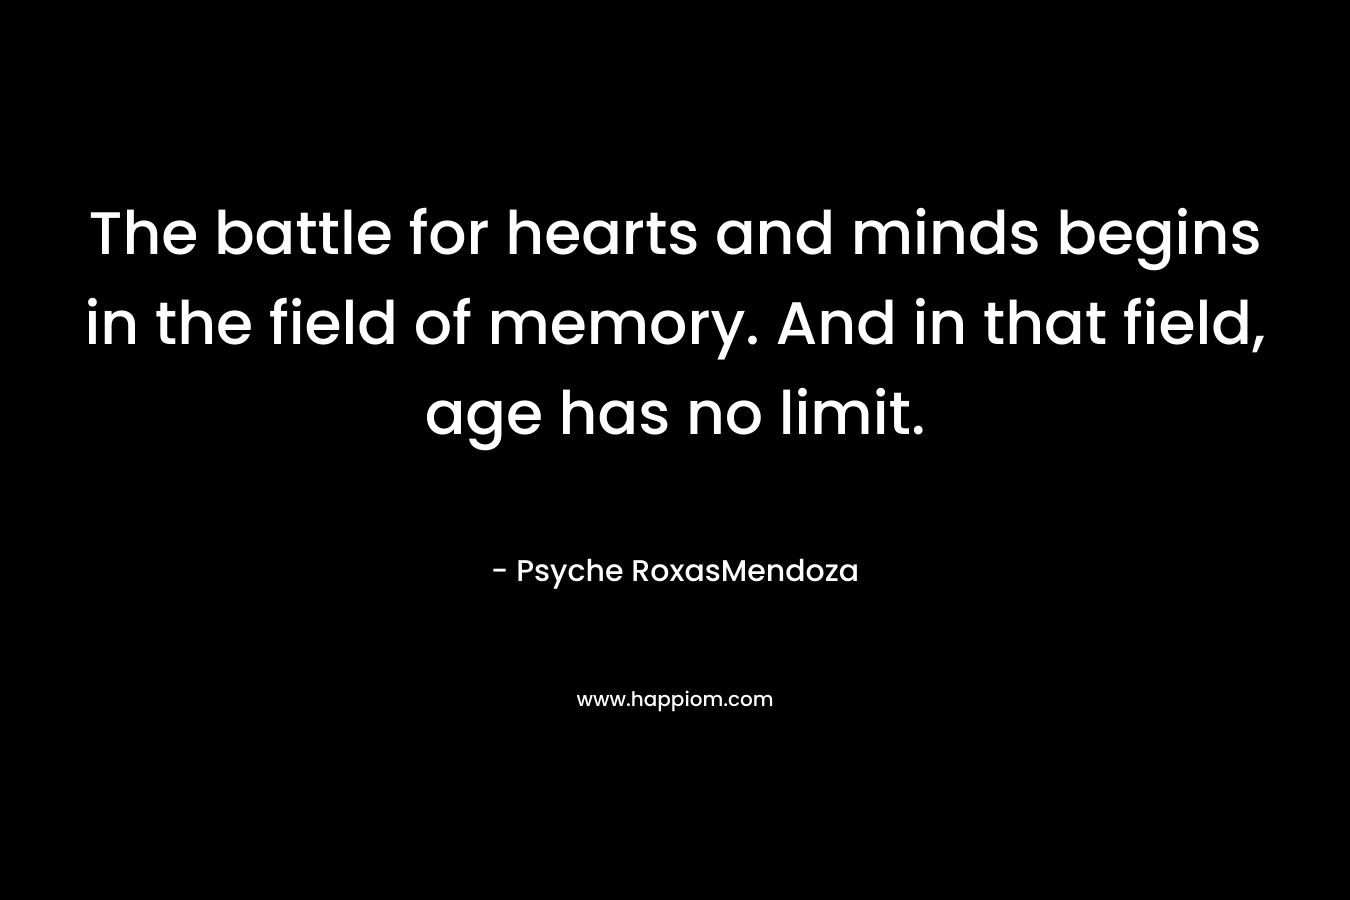 The battle for hearts and minds begins in the field of memory. And in that field, age has no limit.